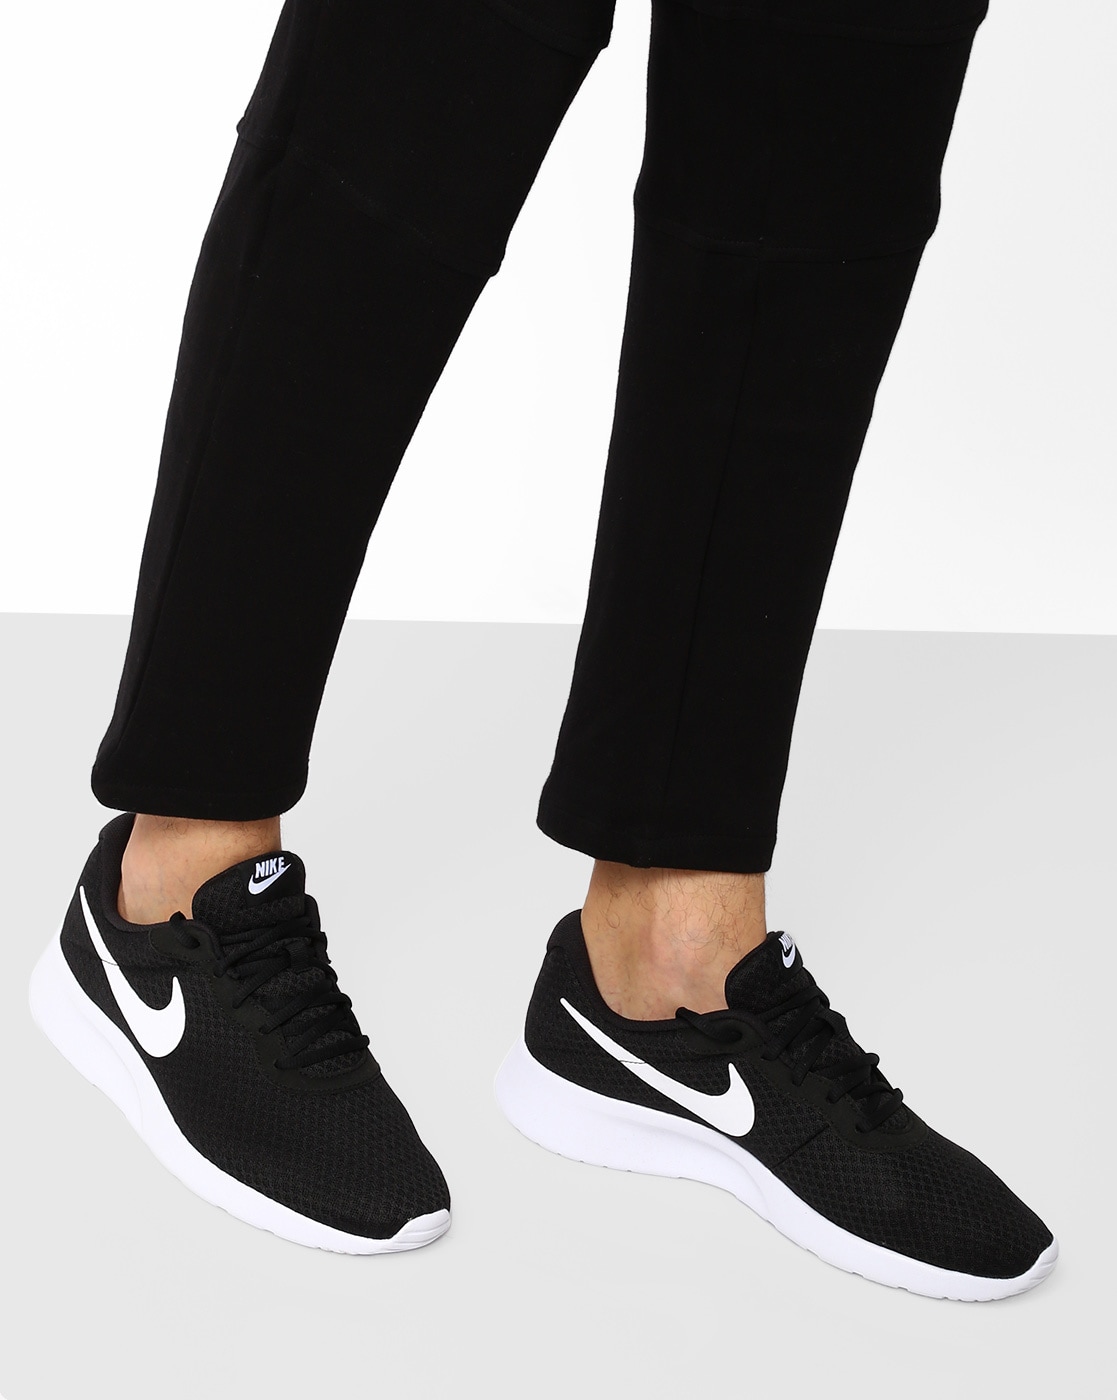 Buy Black Sports Shoes for Men by NIKE 